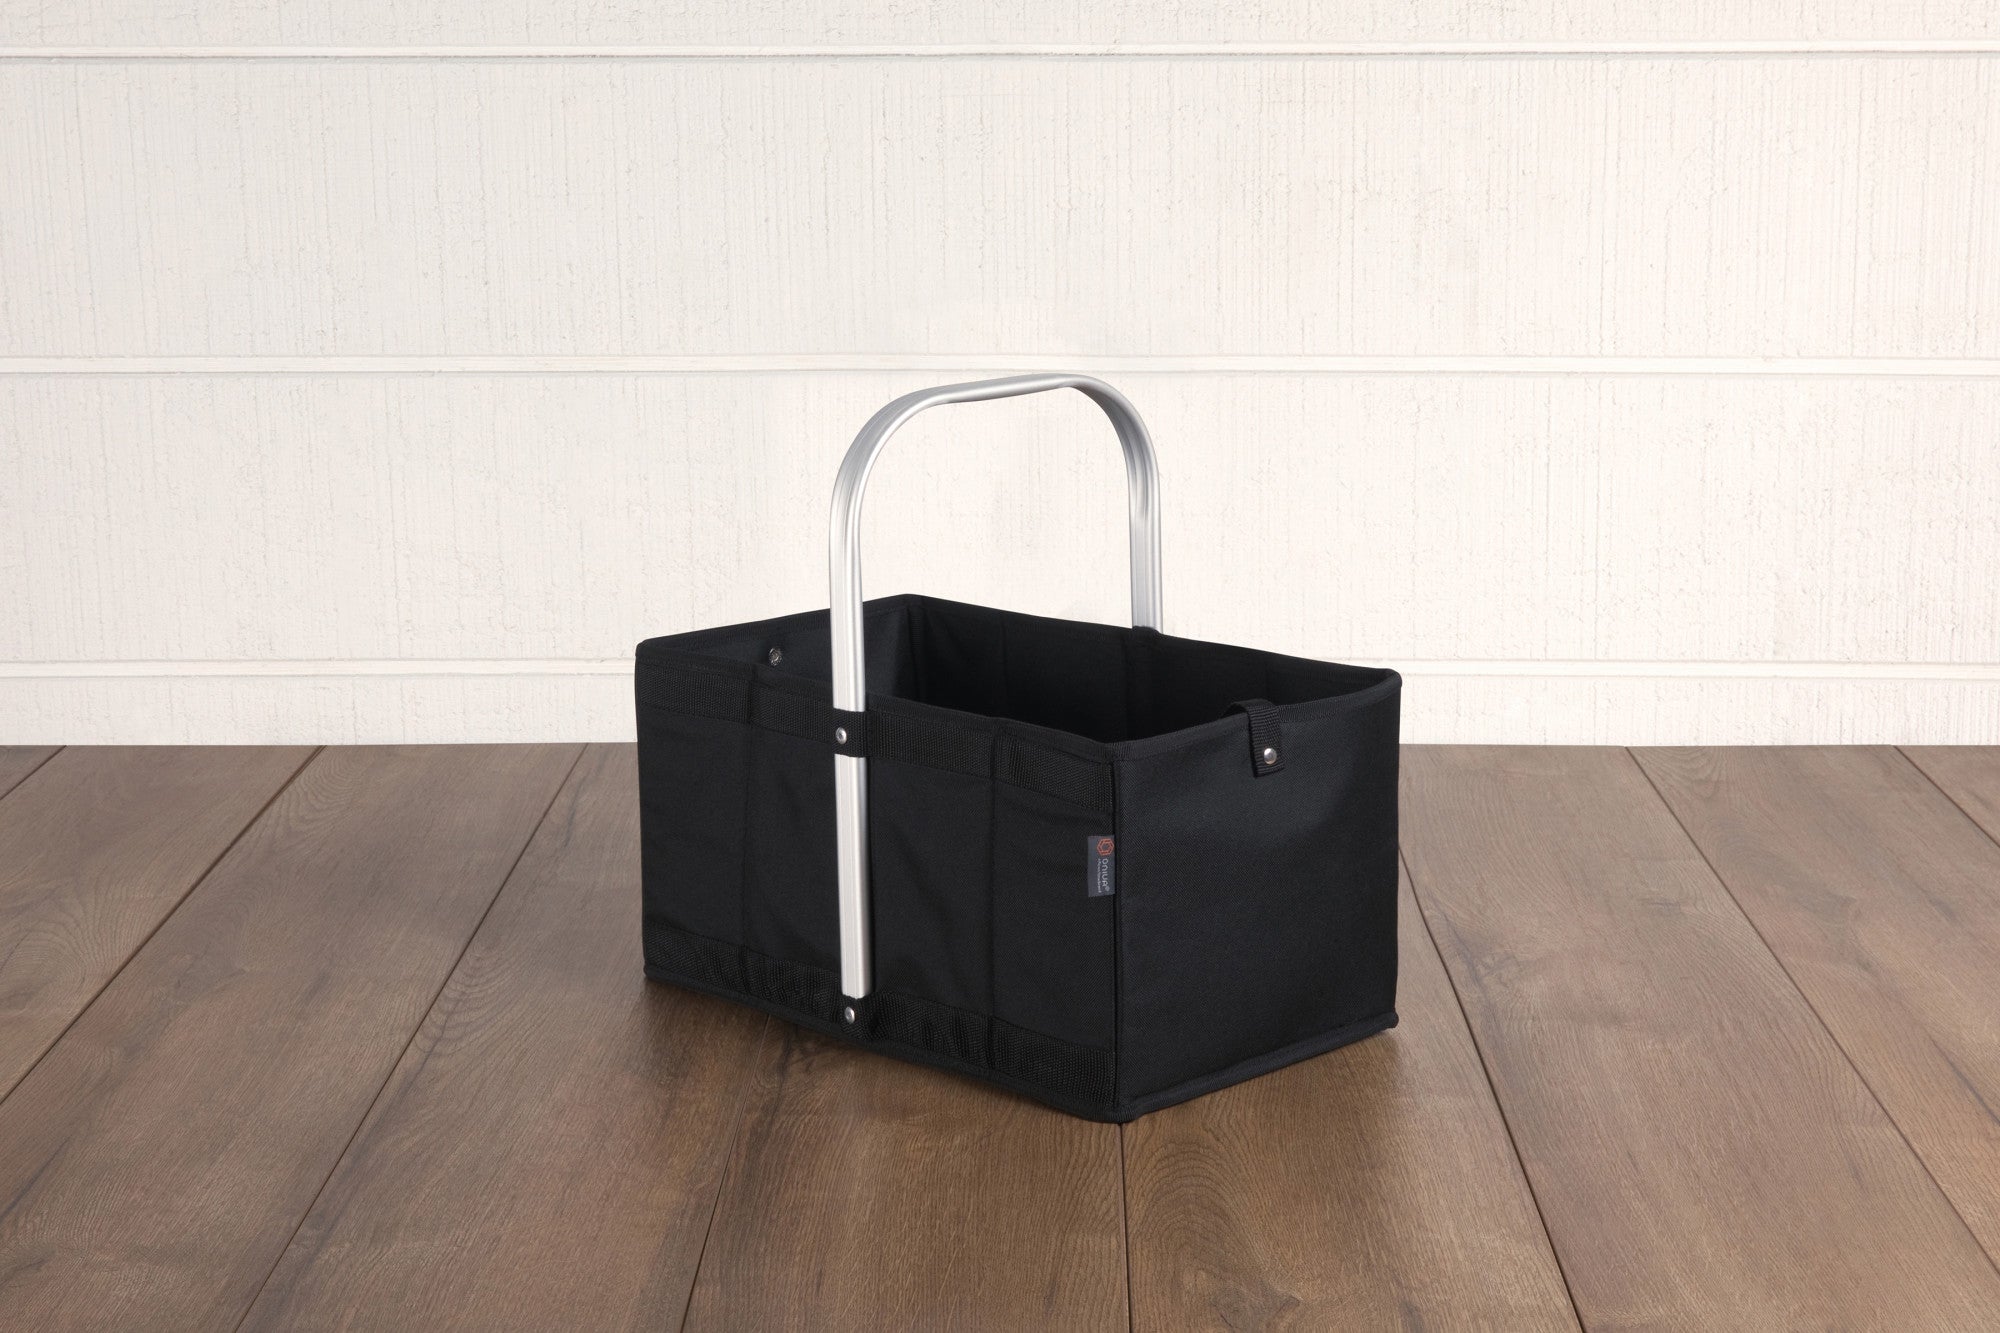 Chicago White Sox - Urban Basket Collapsible Tote